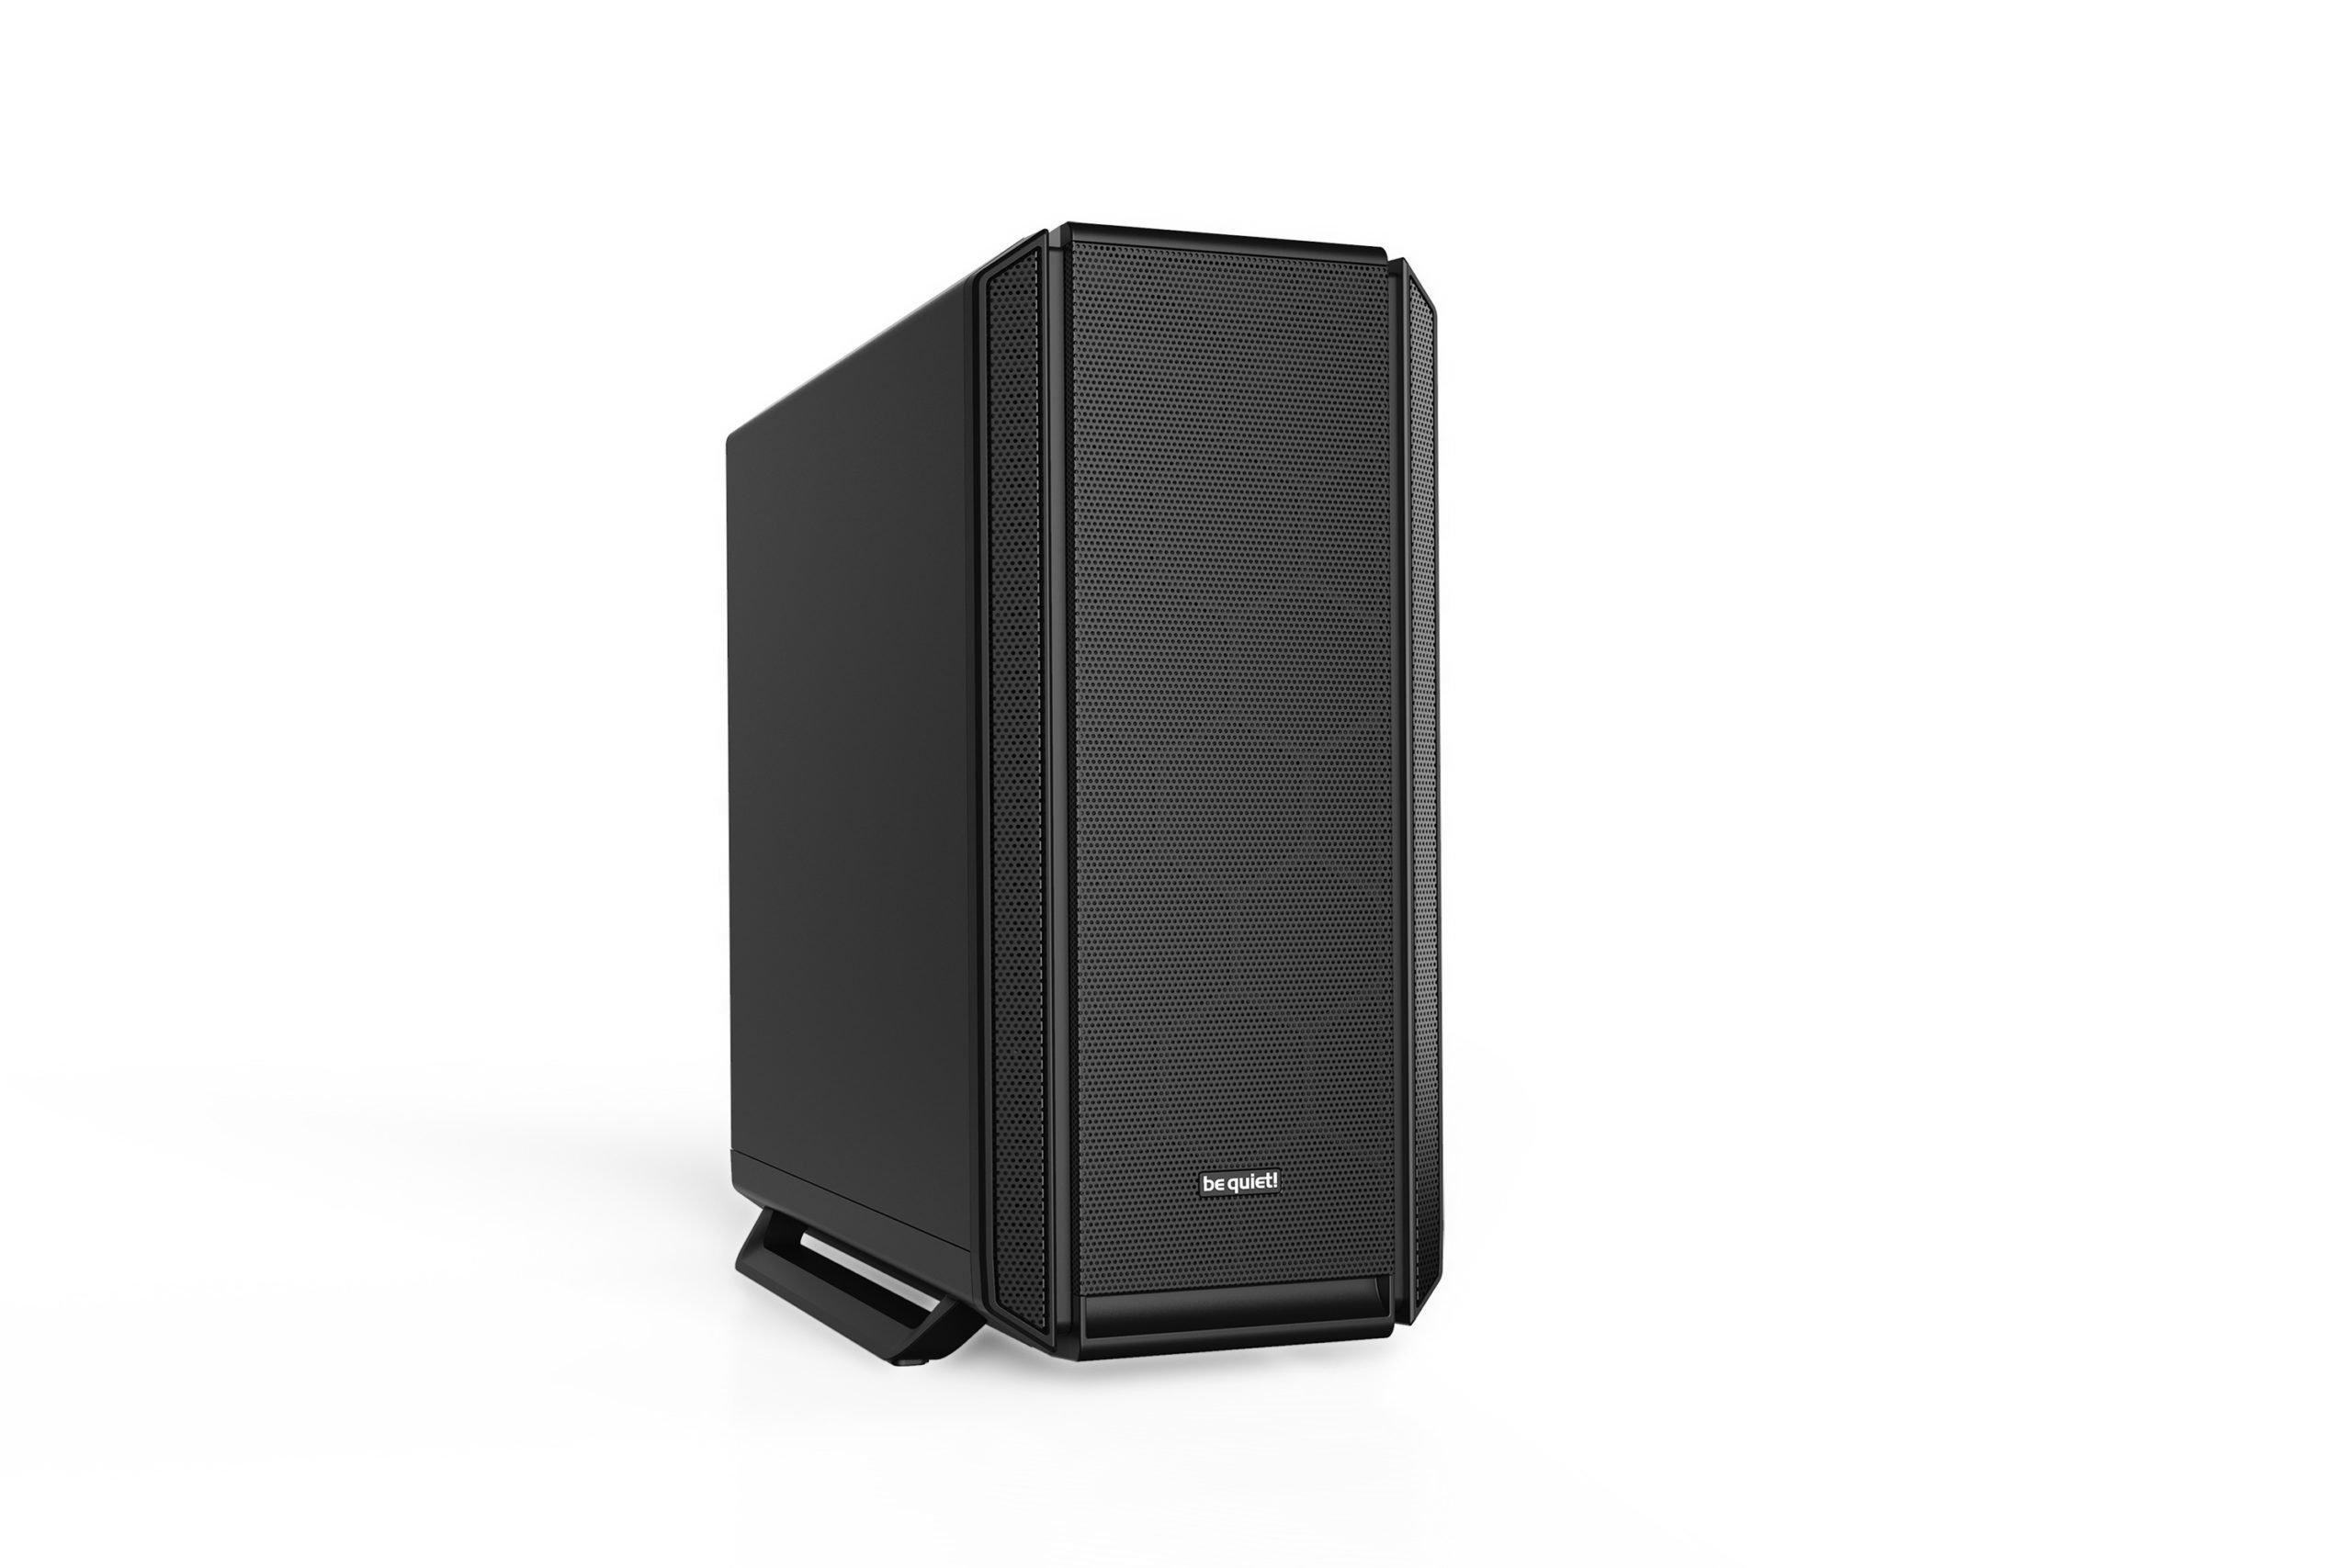 be quiet! Silent Base 802: Flexible housing with focus on quiet cooling or strong airflow